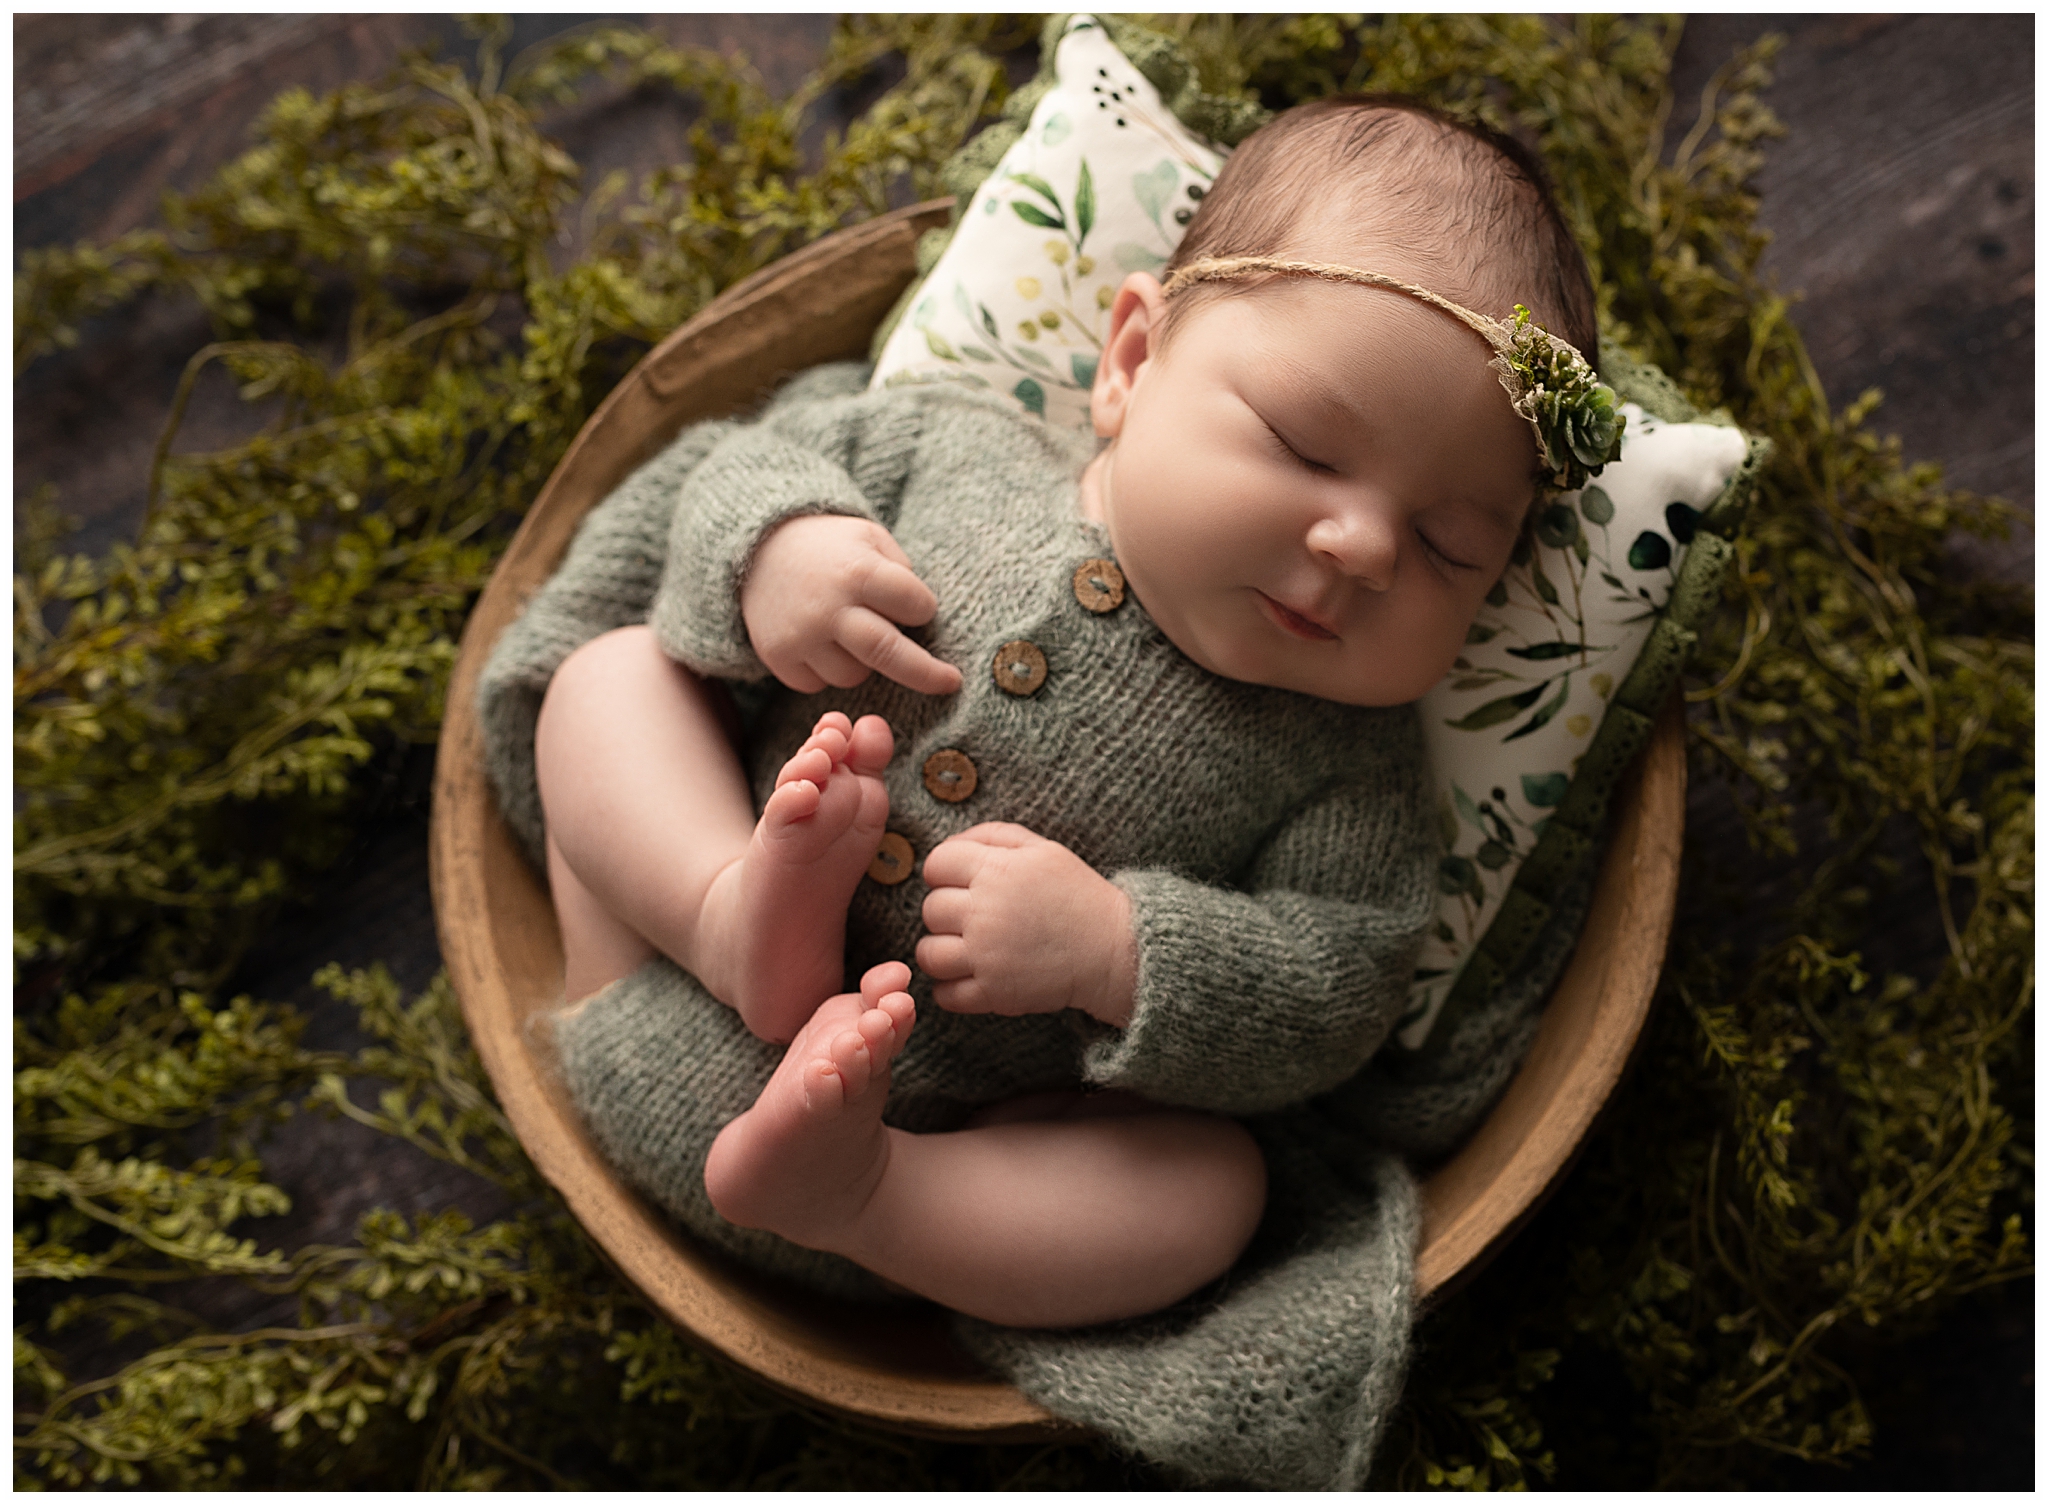 Baby giving the middle finger while sleeping in a brown bowl surrounded by greenery